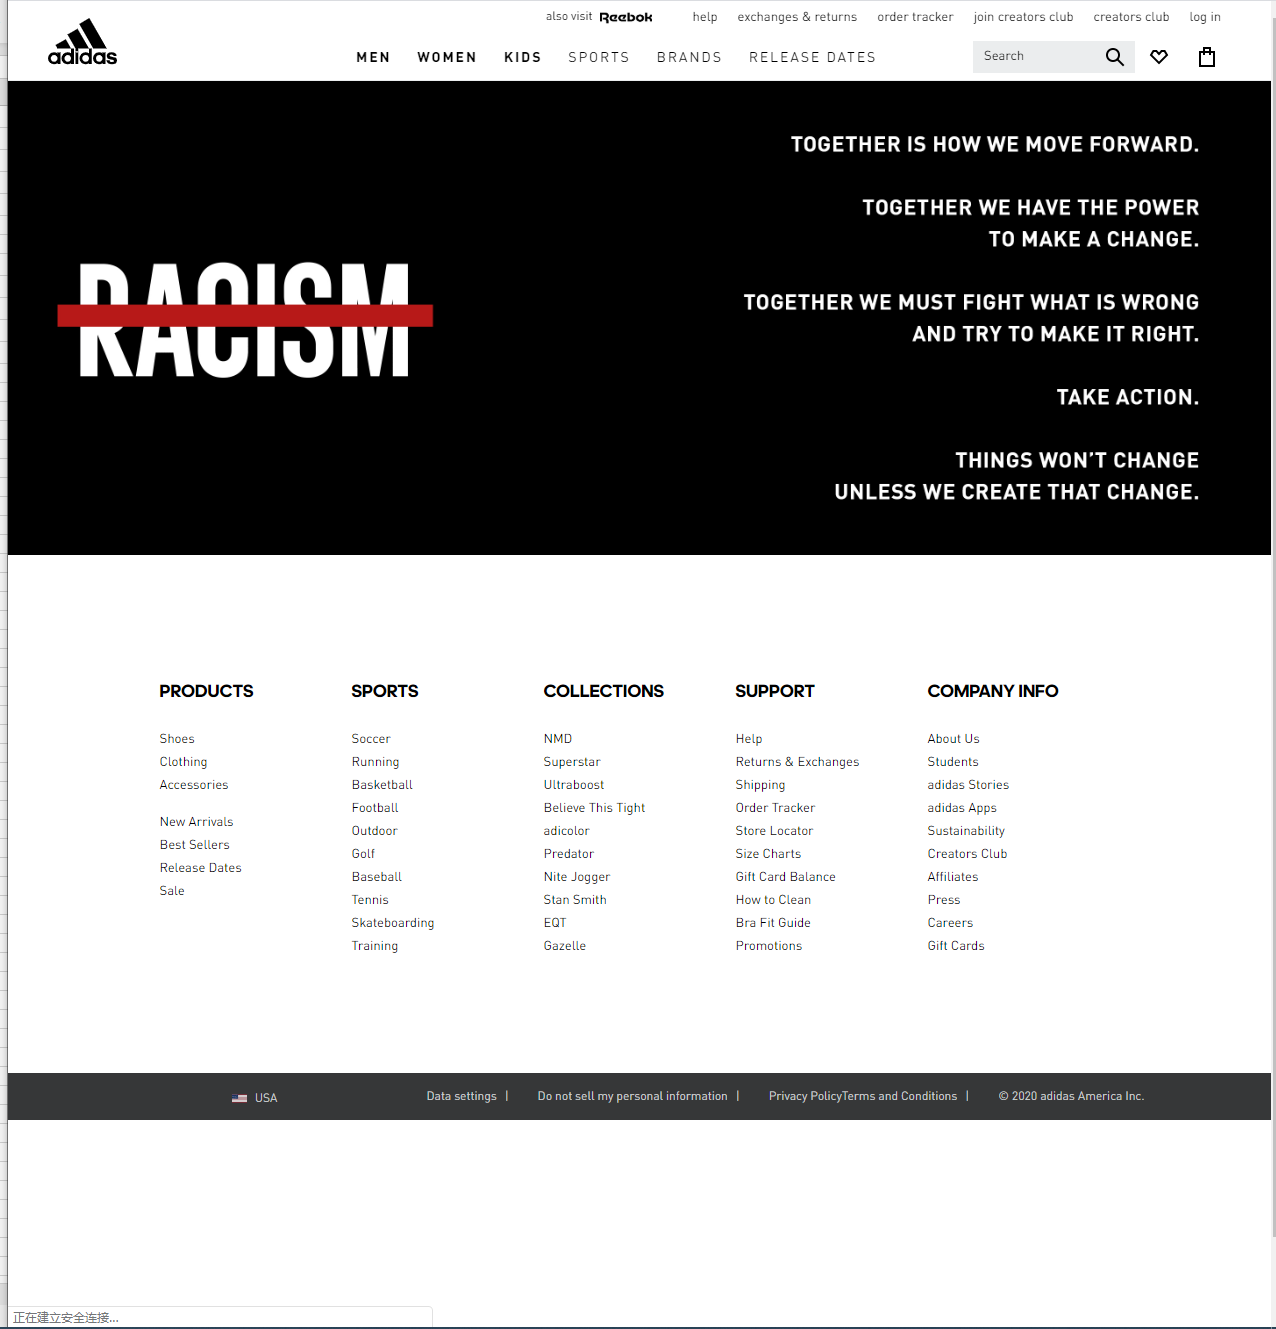 Adidas - Business Site Page